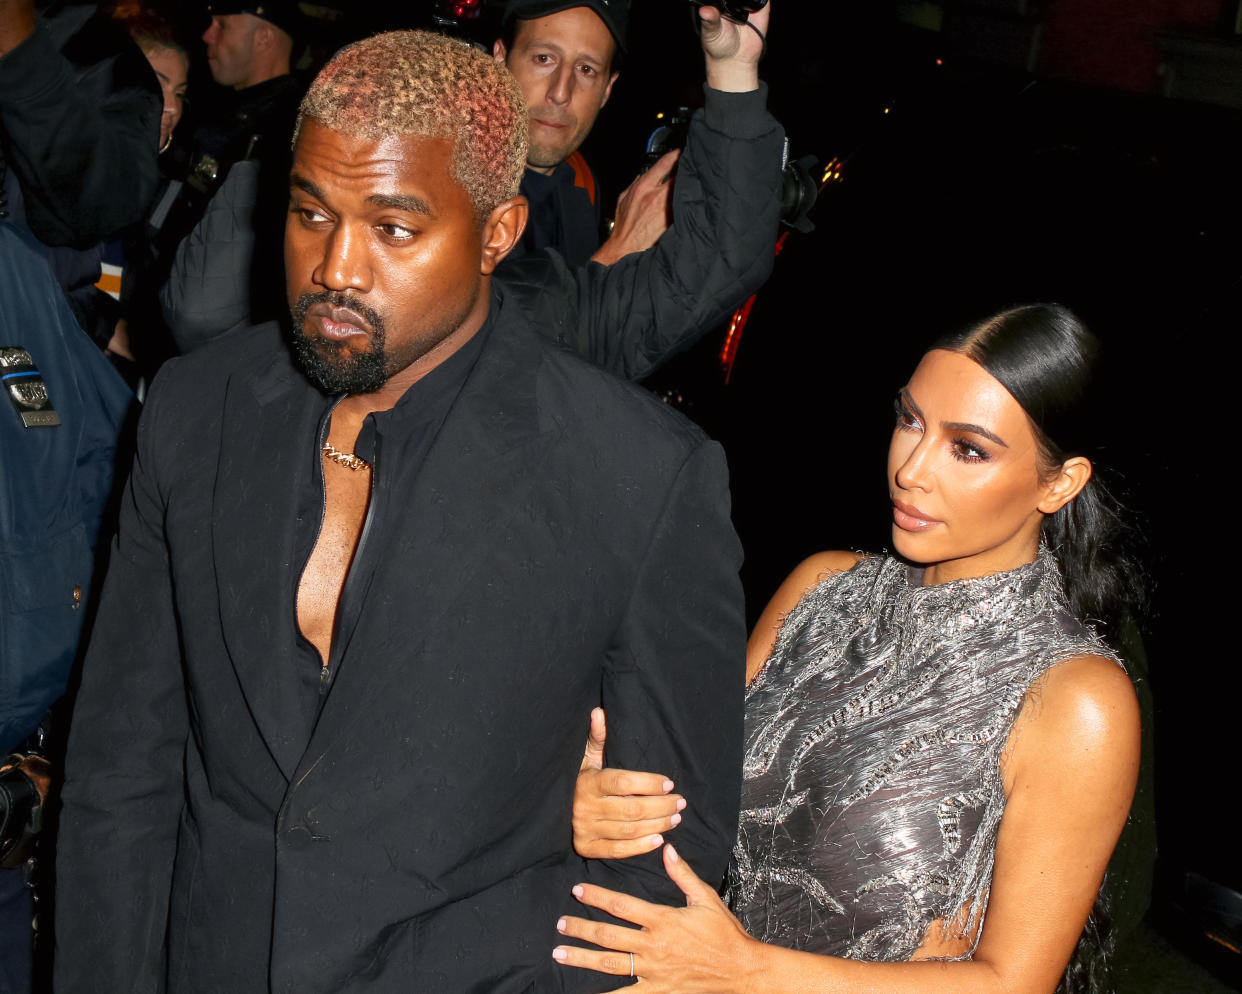 Kanye West lashed out at Drake for following his wife, Kim Kardashian, on Instagram. (Photo: Nancy Rivera/Bauer-Griffin/GC Images)